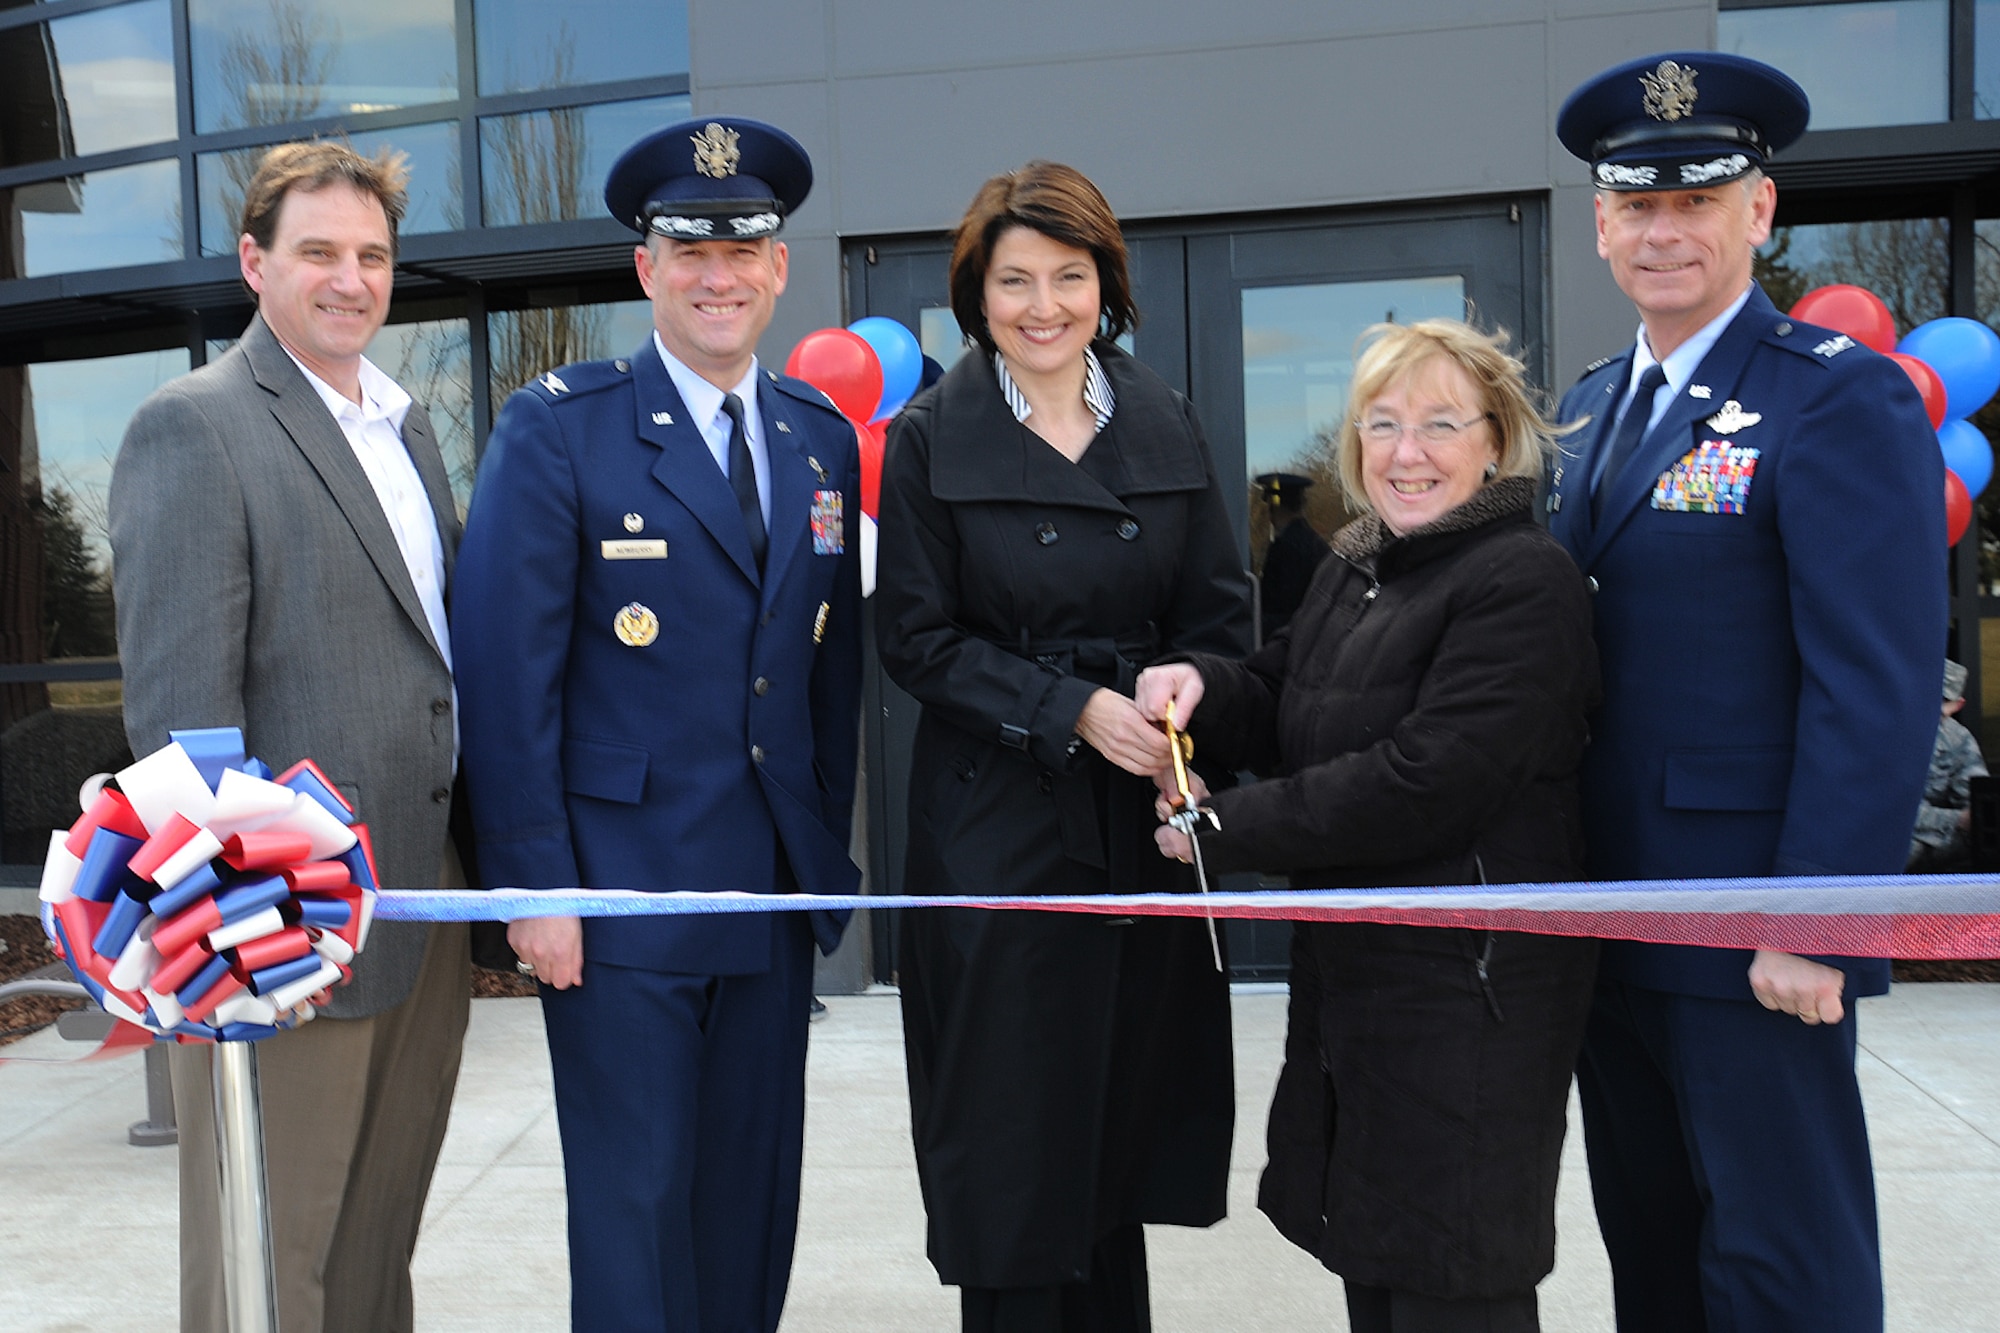 Doug Jackson, Jackson Construction Group president, Col. Brian Newberry, the 92nd Air Refueling Wing commander, U.S. Rep. Cathy McMorris Rodgers, U.S. Sen. Patty Murray and Col. Daniel Swain, the 141st ARW commander, pose for a photo during the ribbon cutting ceremony for the new headquarters building at Fairchild Air Force Base, Wash., March 20, 2014. The ribbon cutting signifies the opening of a new chapter for generations of Airmen to come. (U.S. Air Force photo by Airman 1st Class Janelle Patiño/Released)